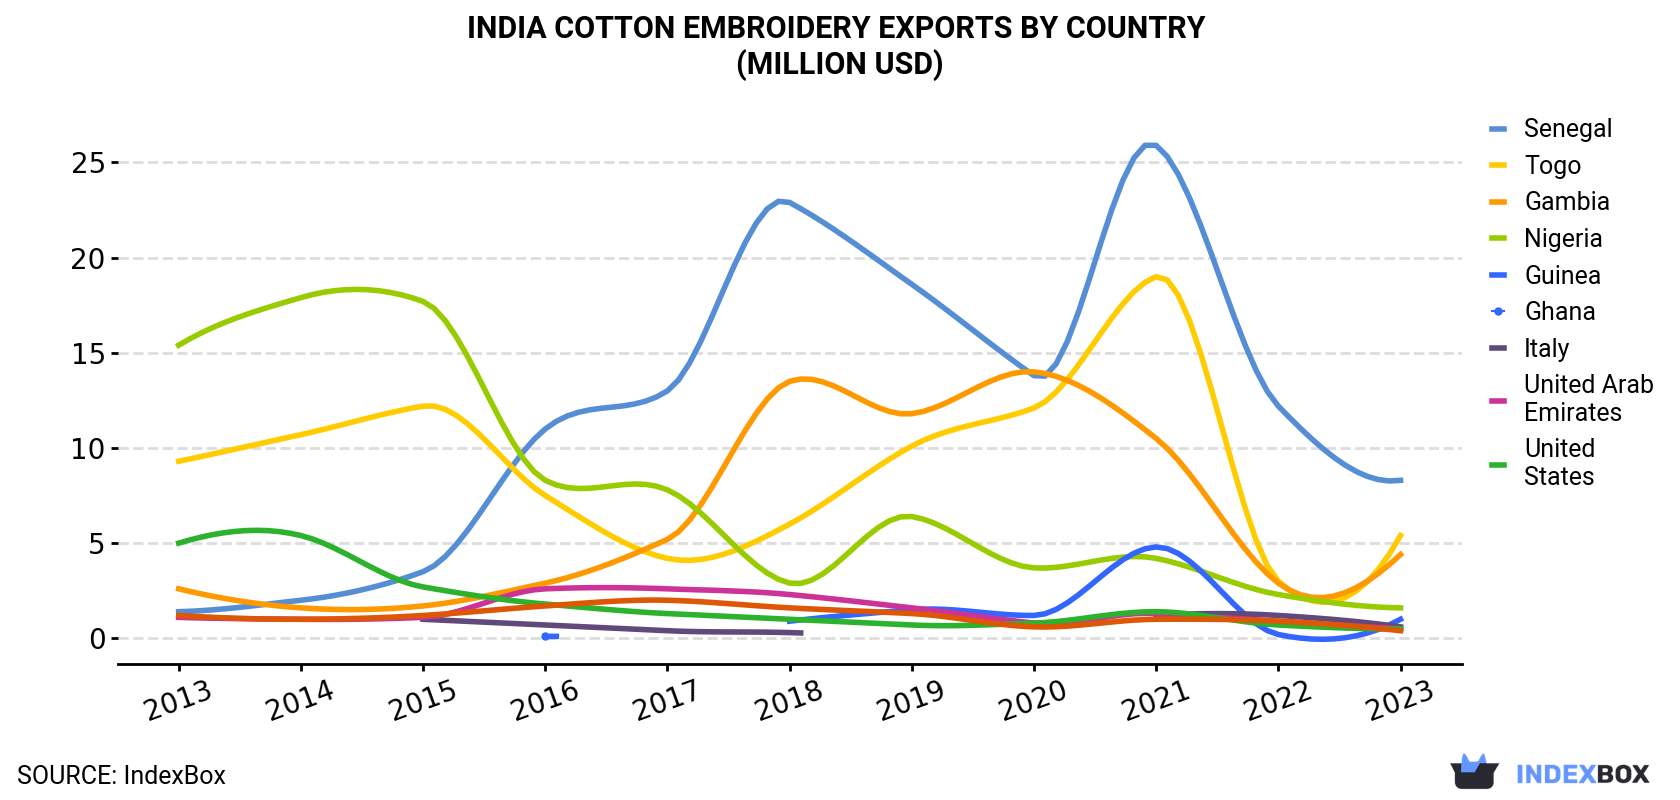 India Cotton Embroidery Exports By Country (Million USD)